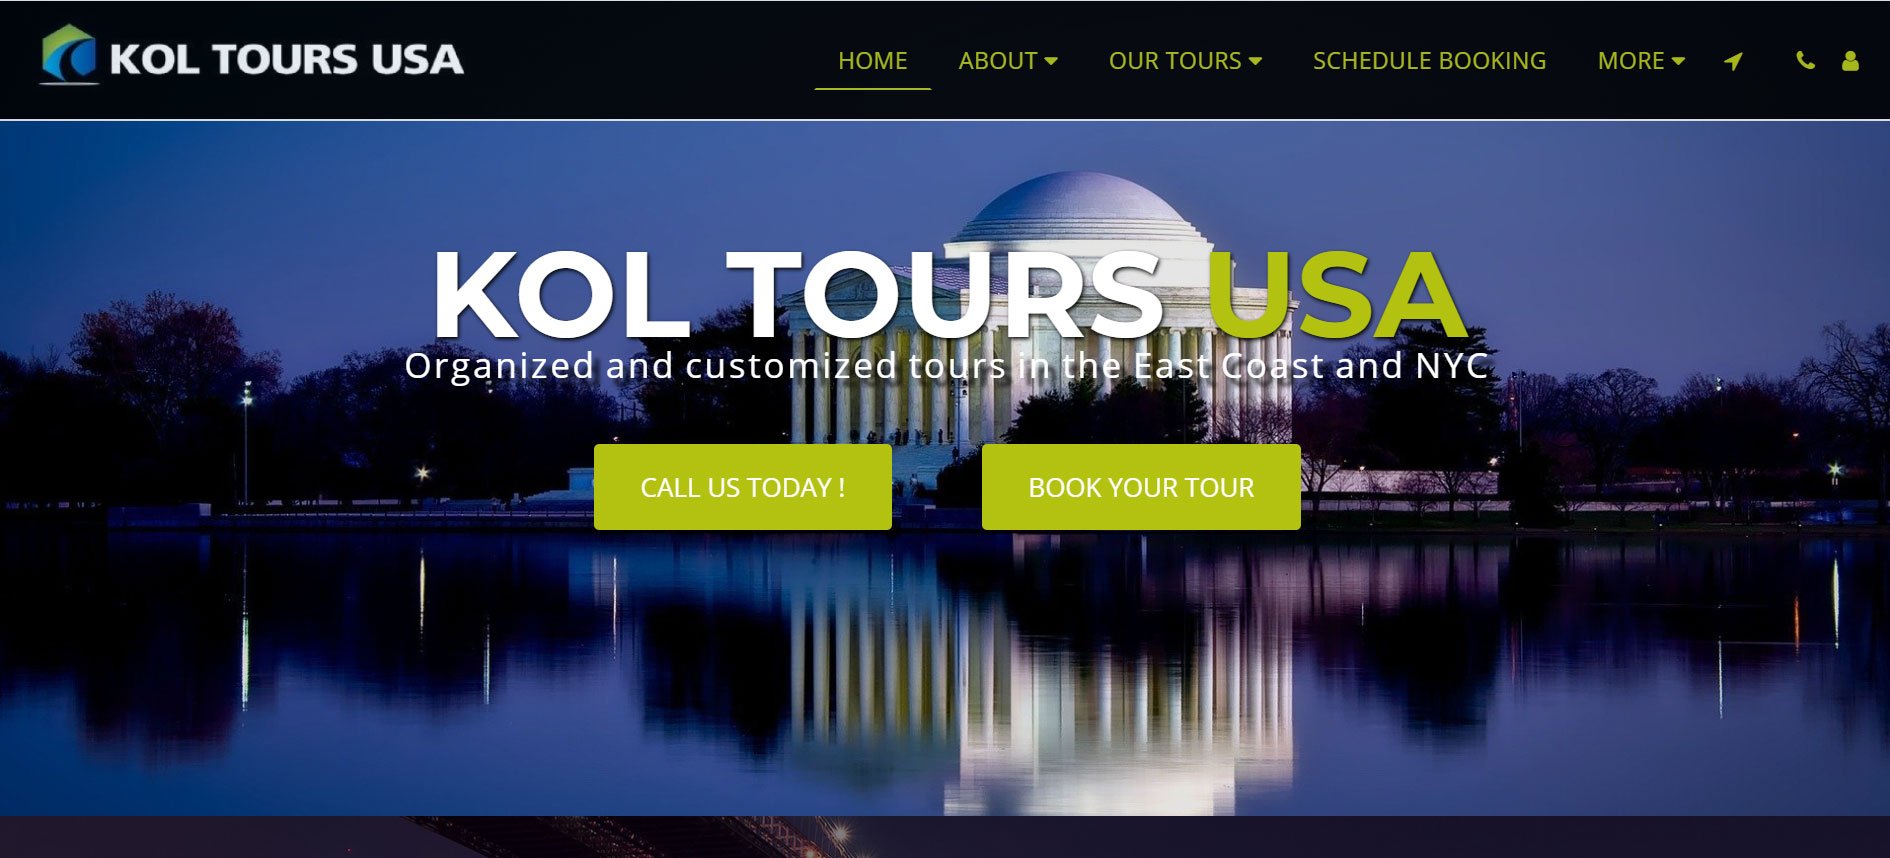 Organized tours in the USA